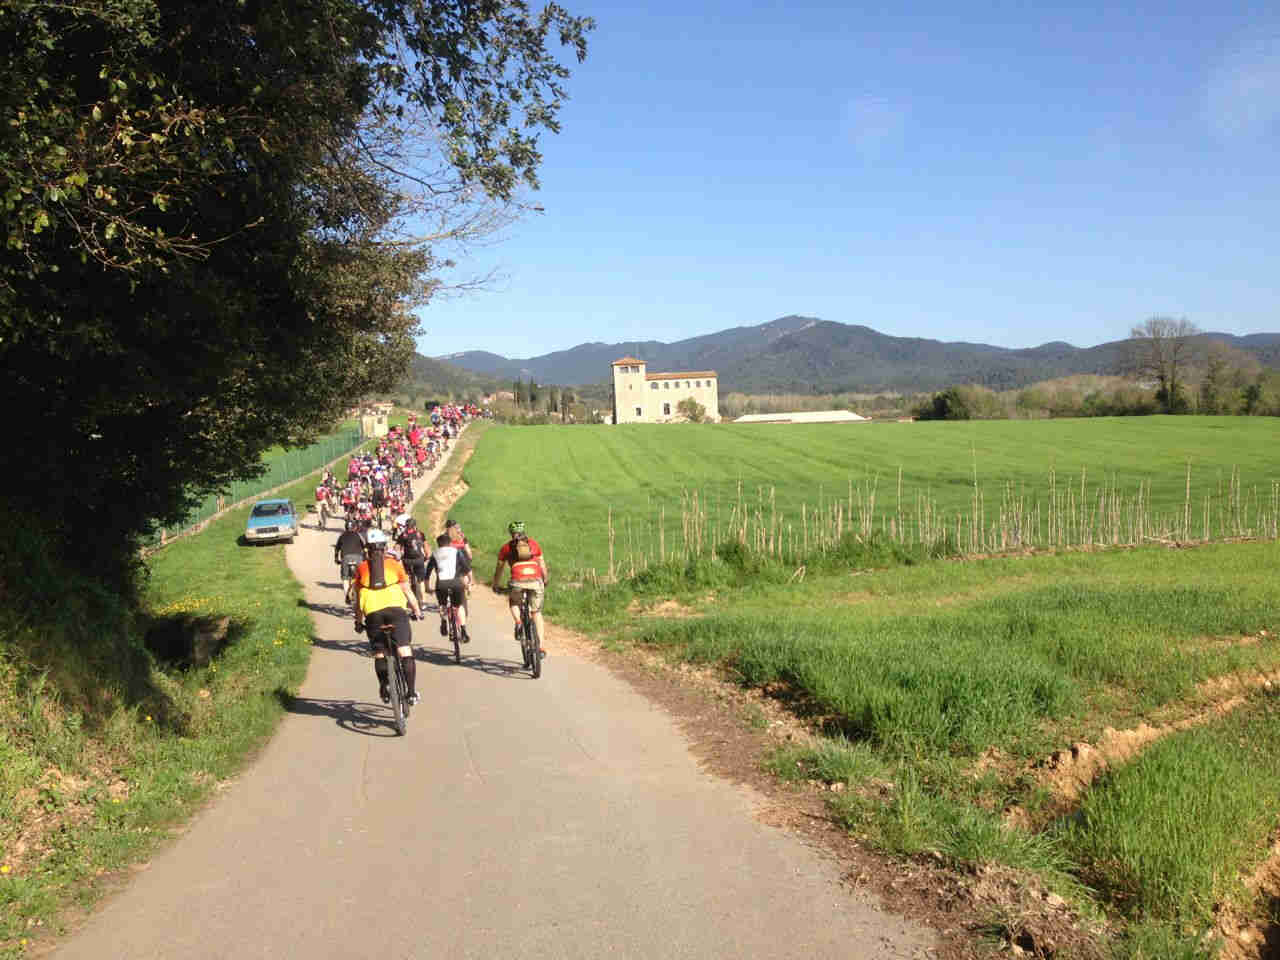 Rear, straight-away view of a group of cyclists, riding down a paved road next to a grass field, towards the mountains